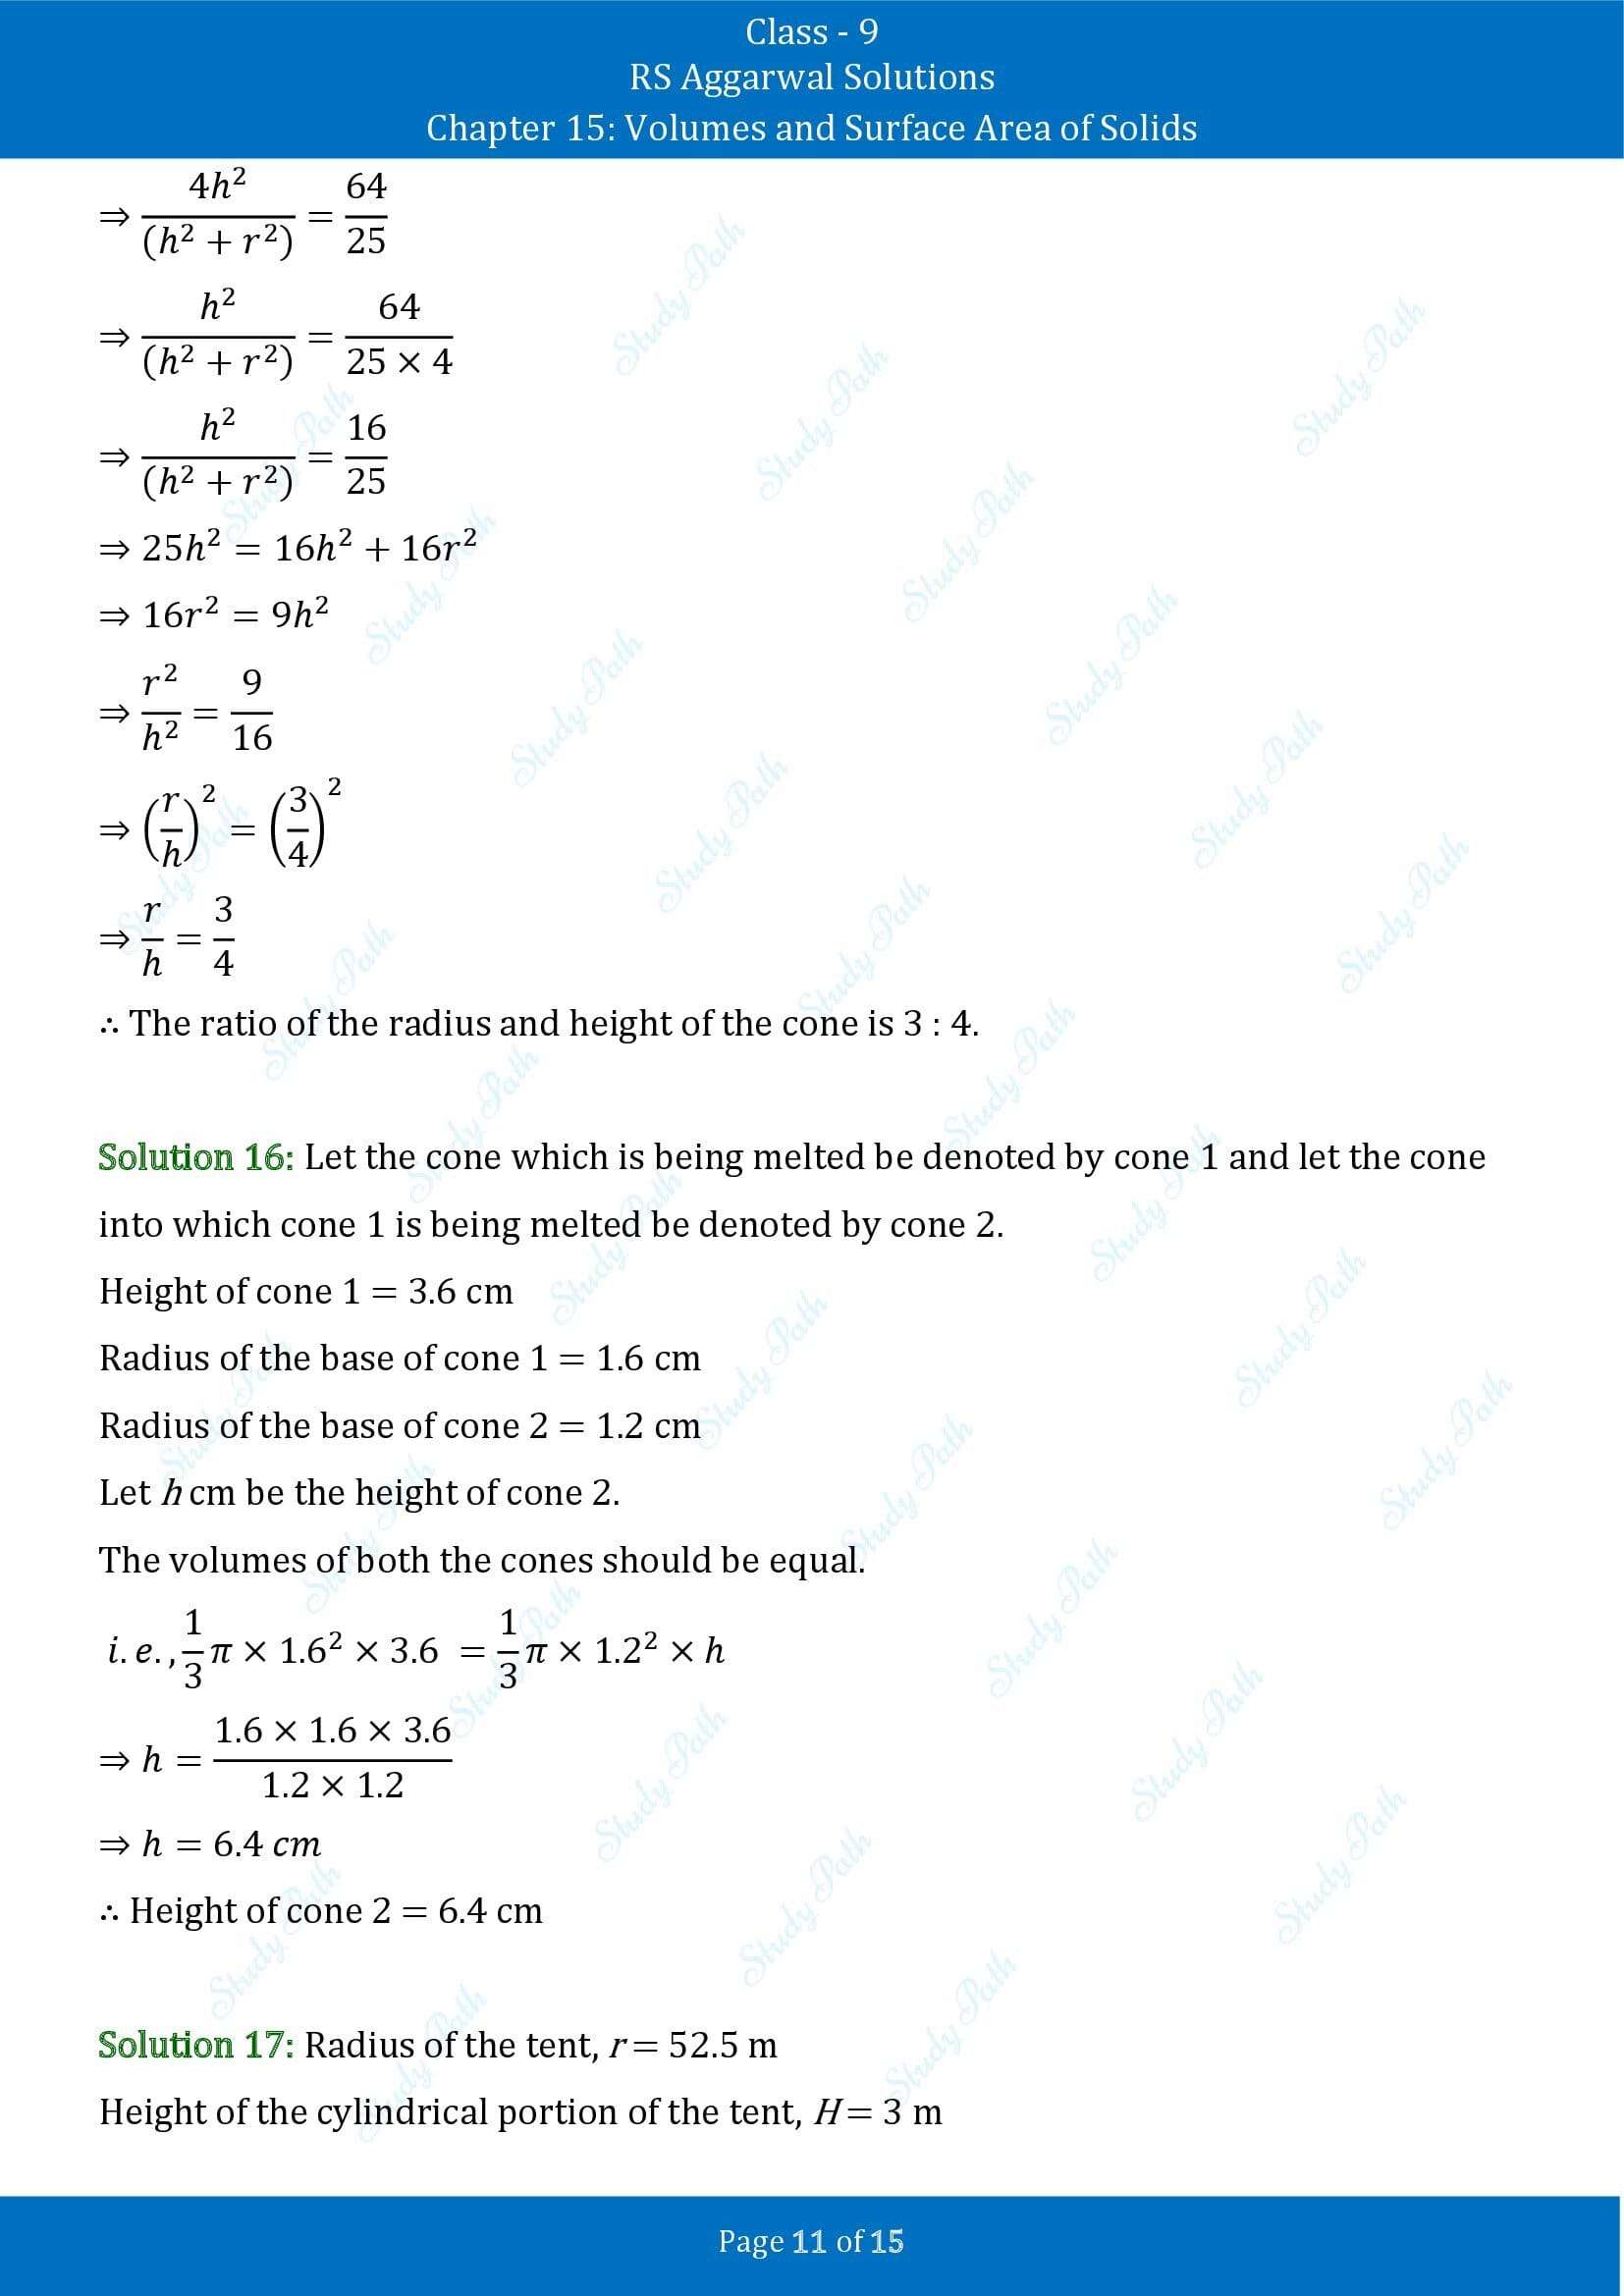 RS Aggarwal Solutions Class 9 Chapter 15 Volumes and Surface Area of Solids Exercise 15C 00011